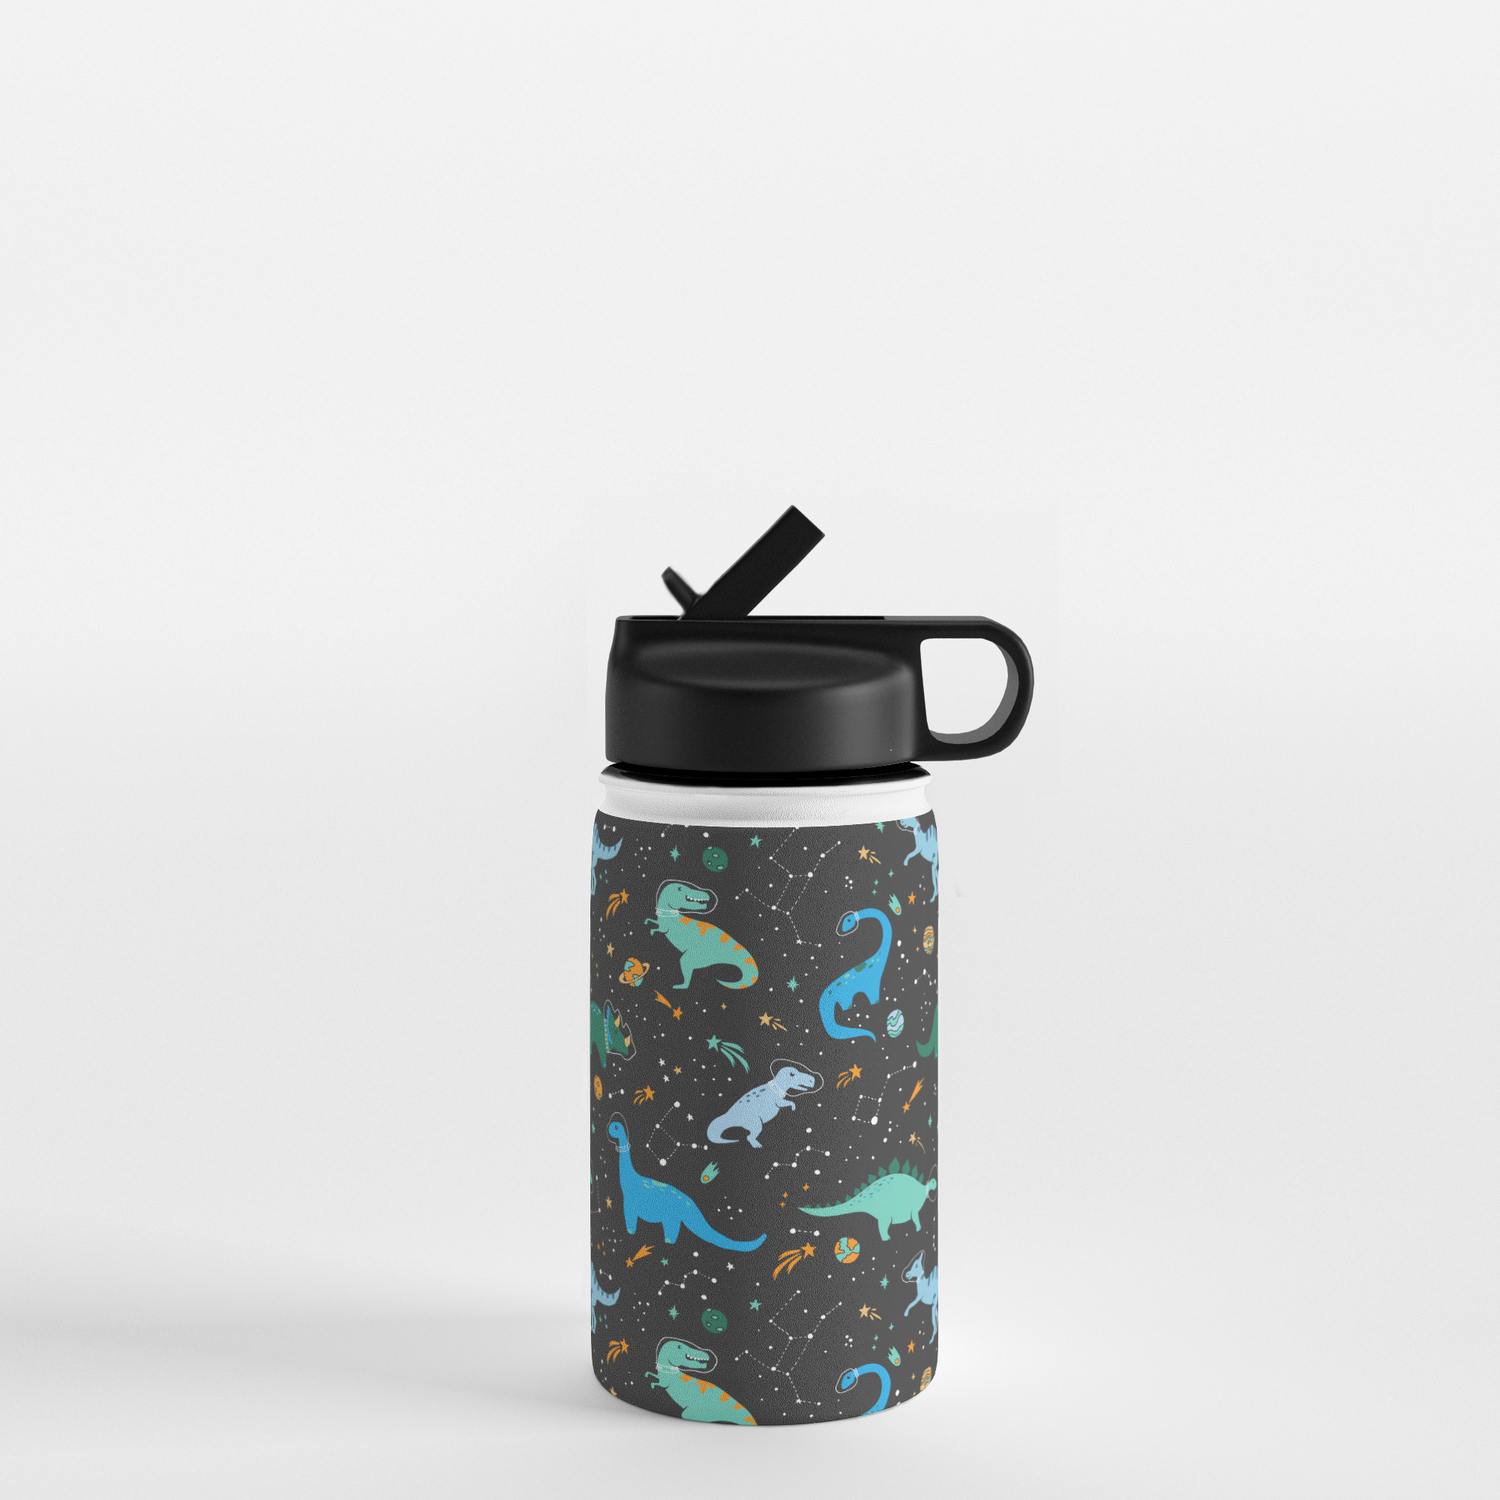 Details about   Astronaut And Dark Moon Art Space Water Bottle With Carabiner 